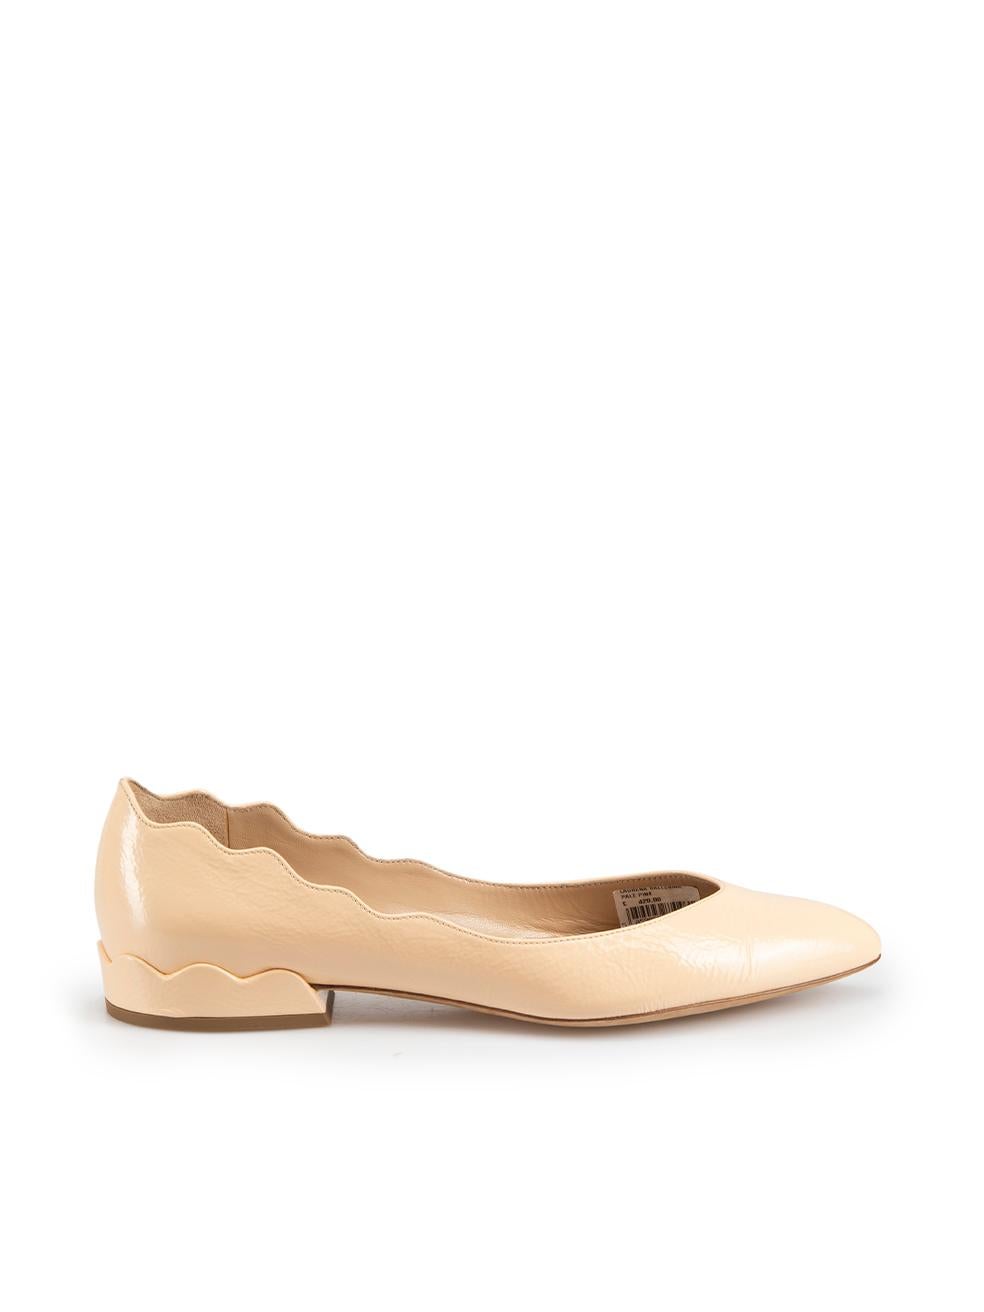 CONDITION is Very good. Minimal wear to flats is evident. Minimal wear to upper with very light creasing over the toe and negligible abrasion at the insole on this used Chloé designer resale item. Comes in original box.

Details
Nude
Leather
Ballet